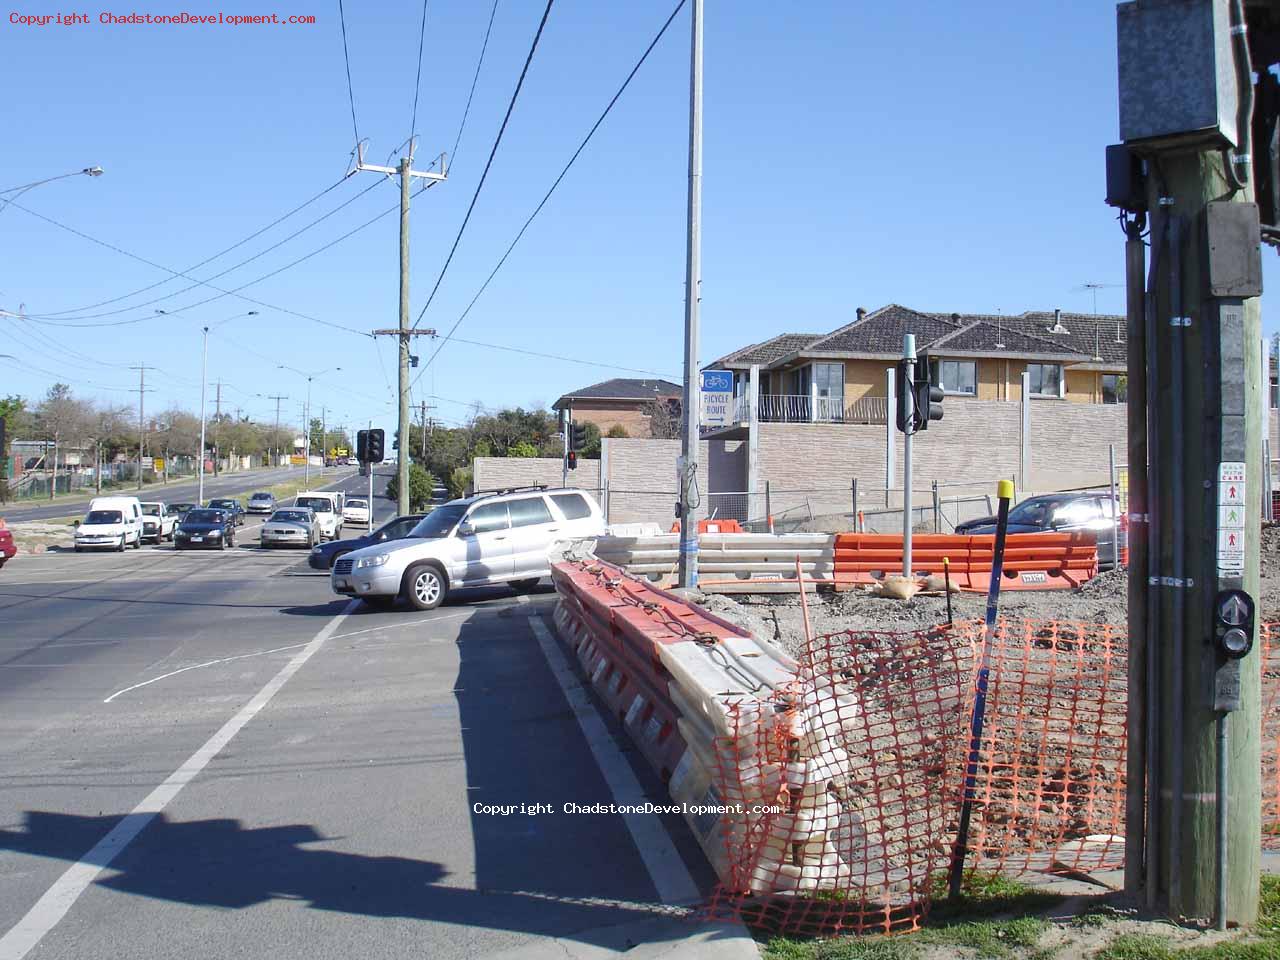 Warrigal Rd/Middle Rd intersection - Chadstone Development Discussions